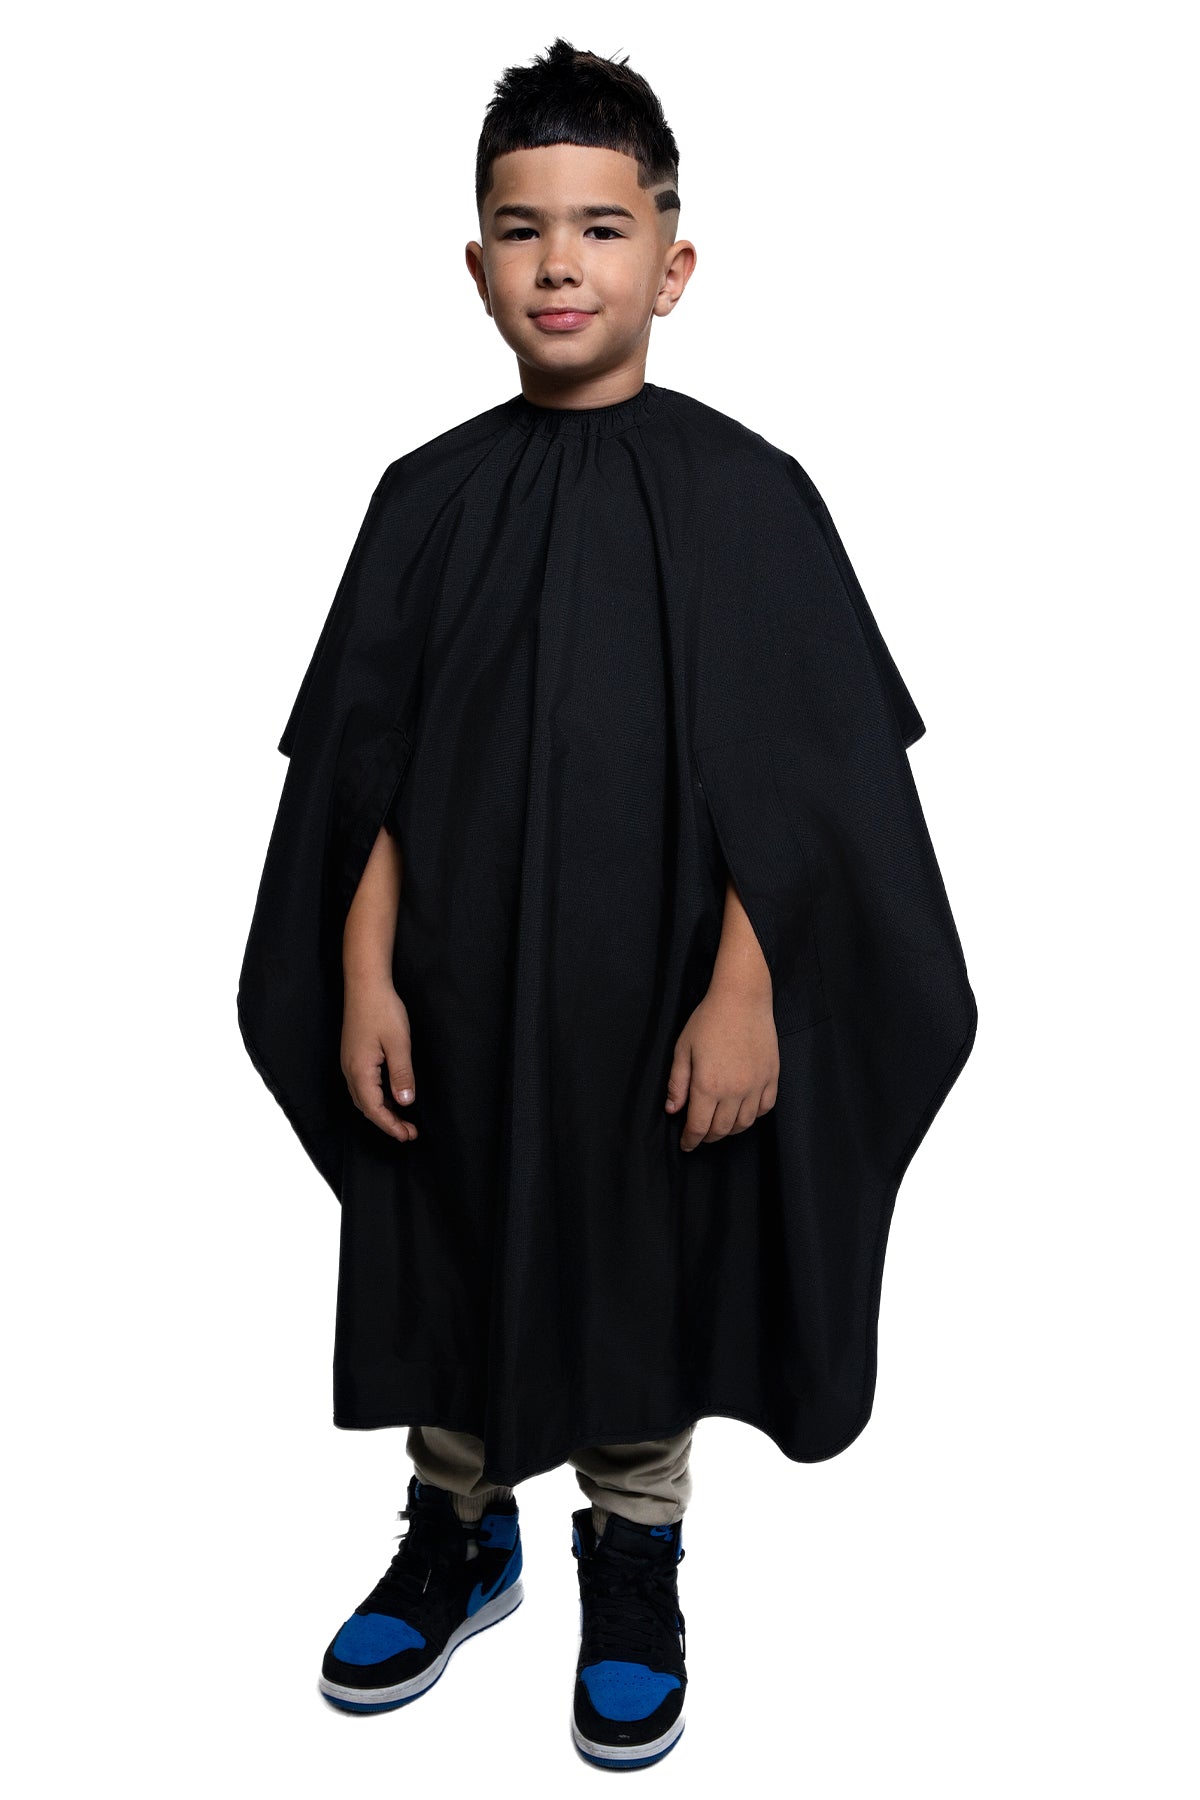 The Hands Free Barber Cape - Junior